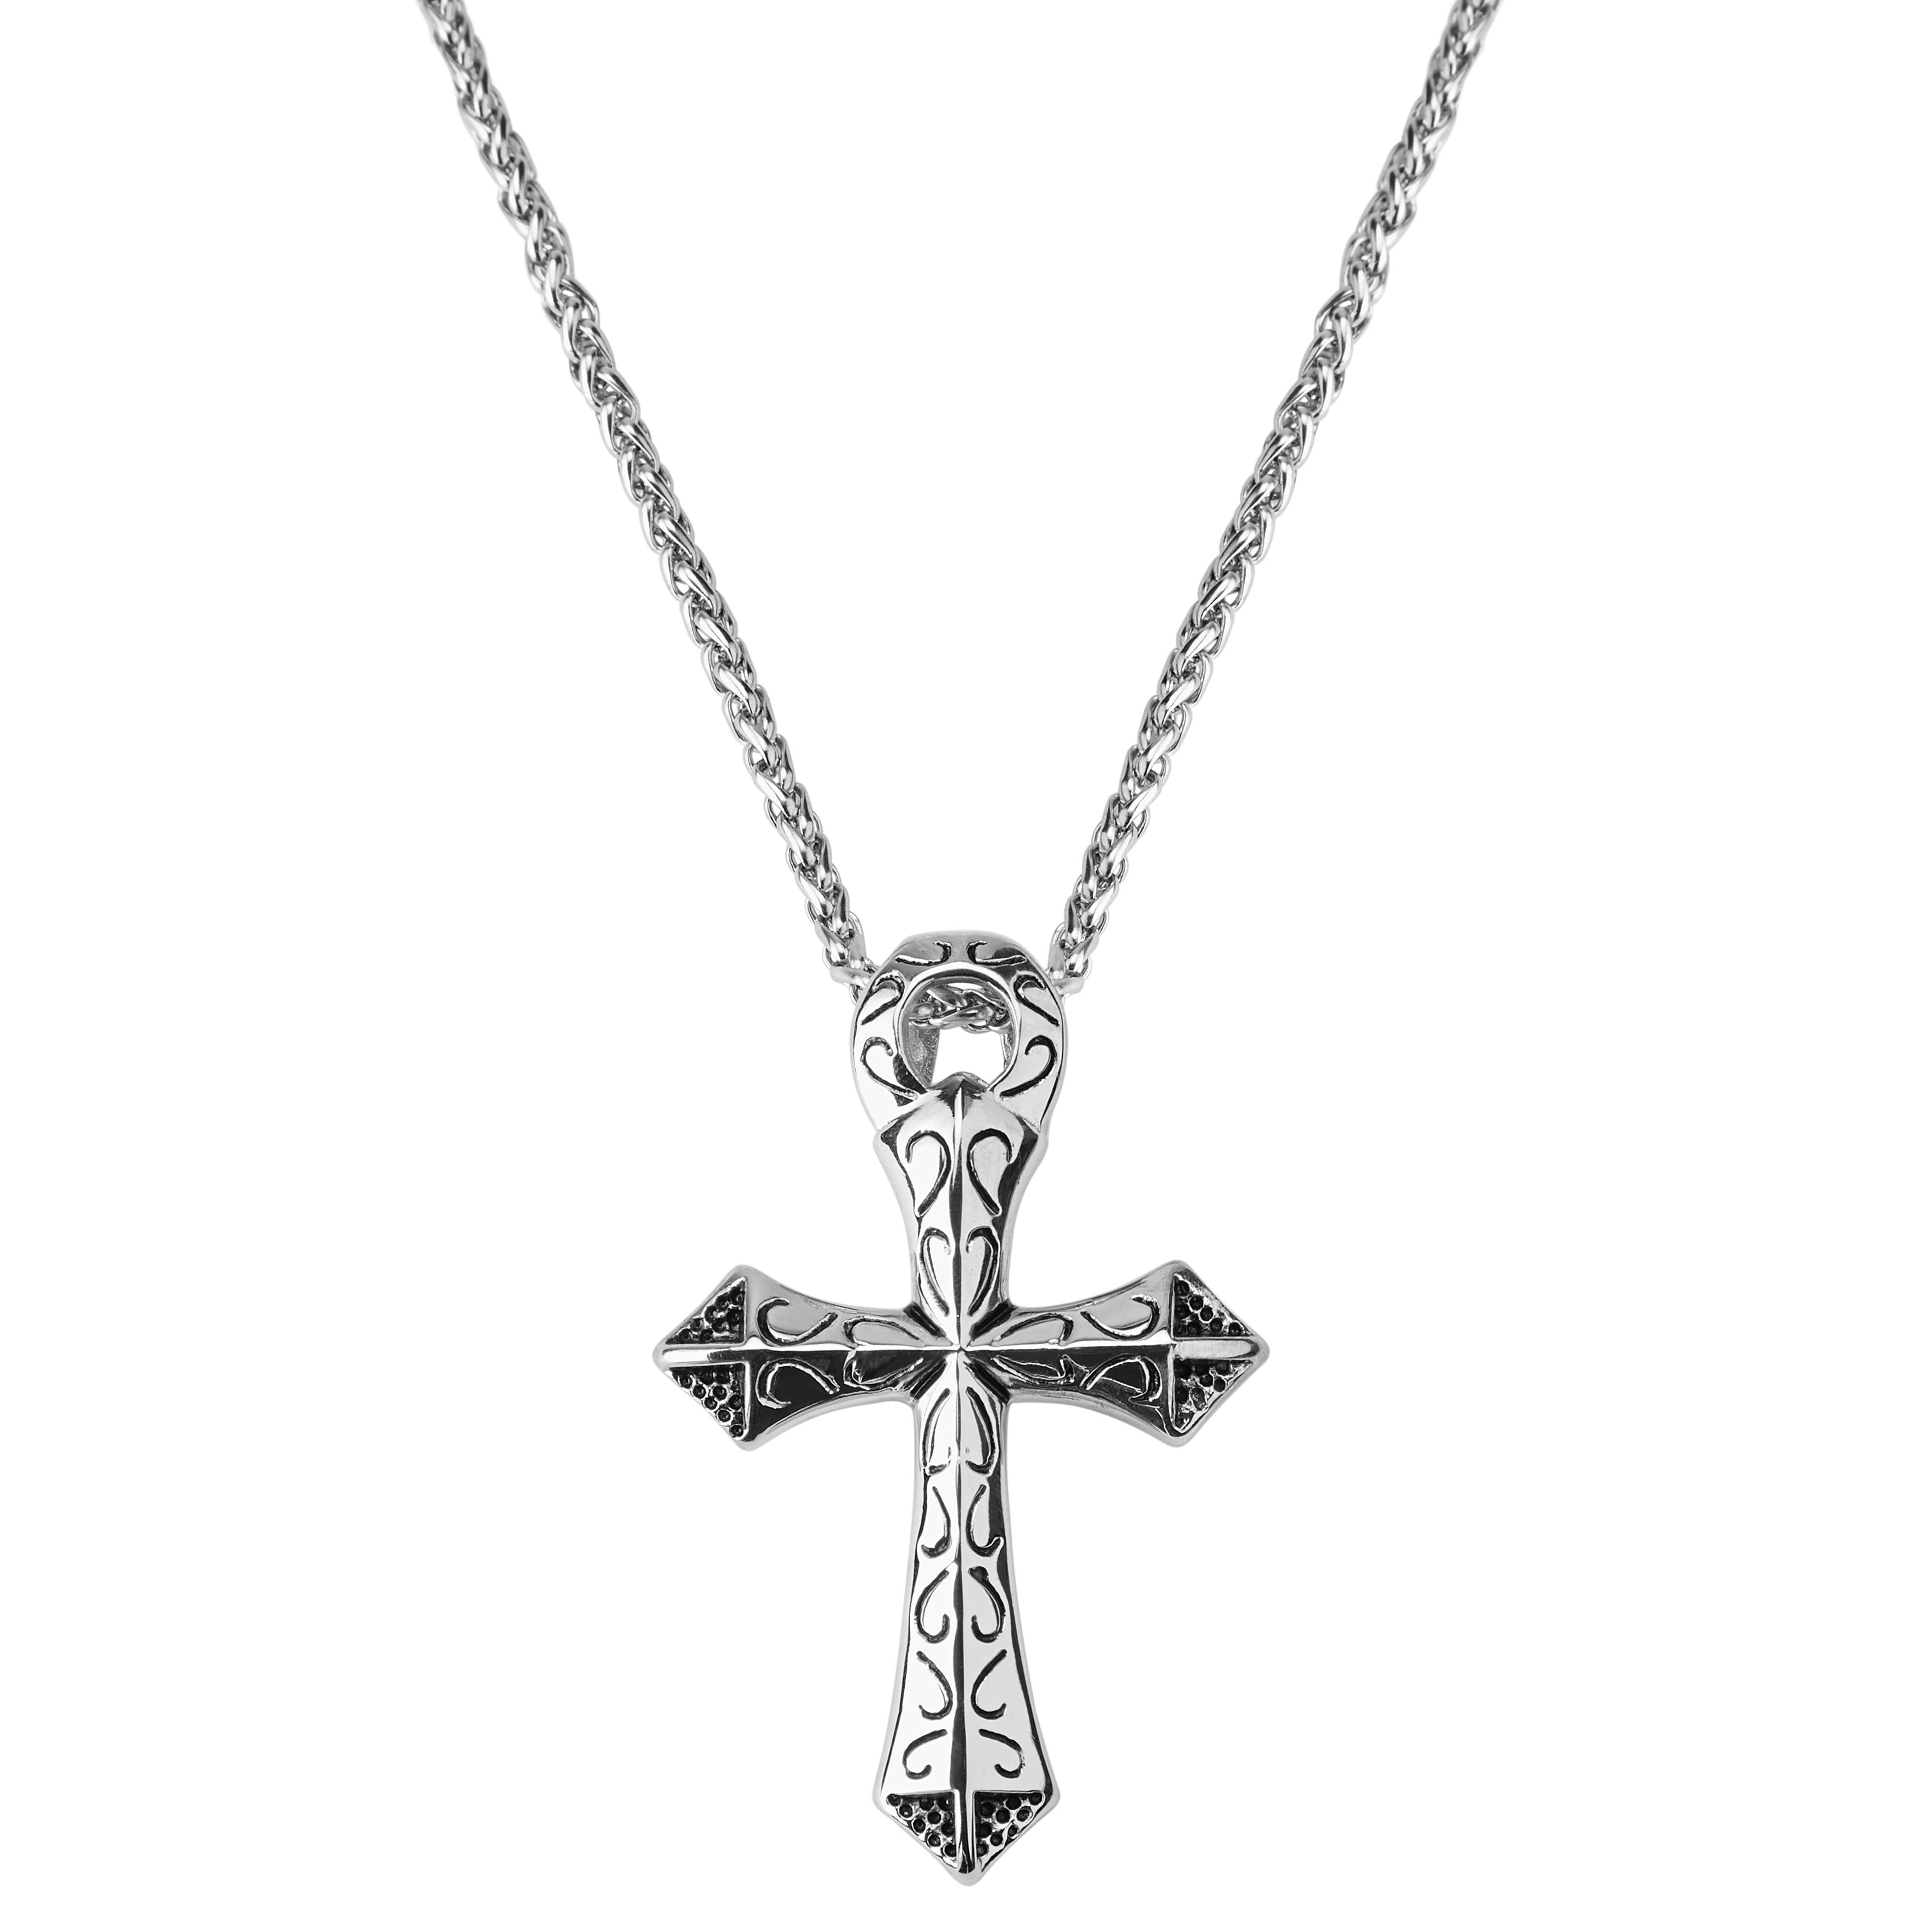 Silver-Tone Stainless Steel Crusader Cross Curb Chain Necklace